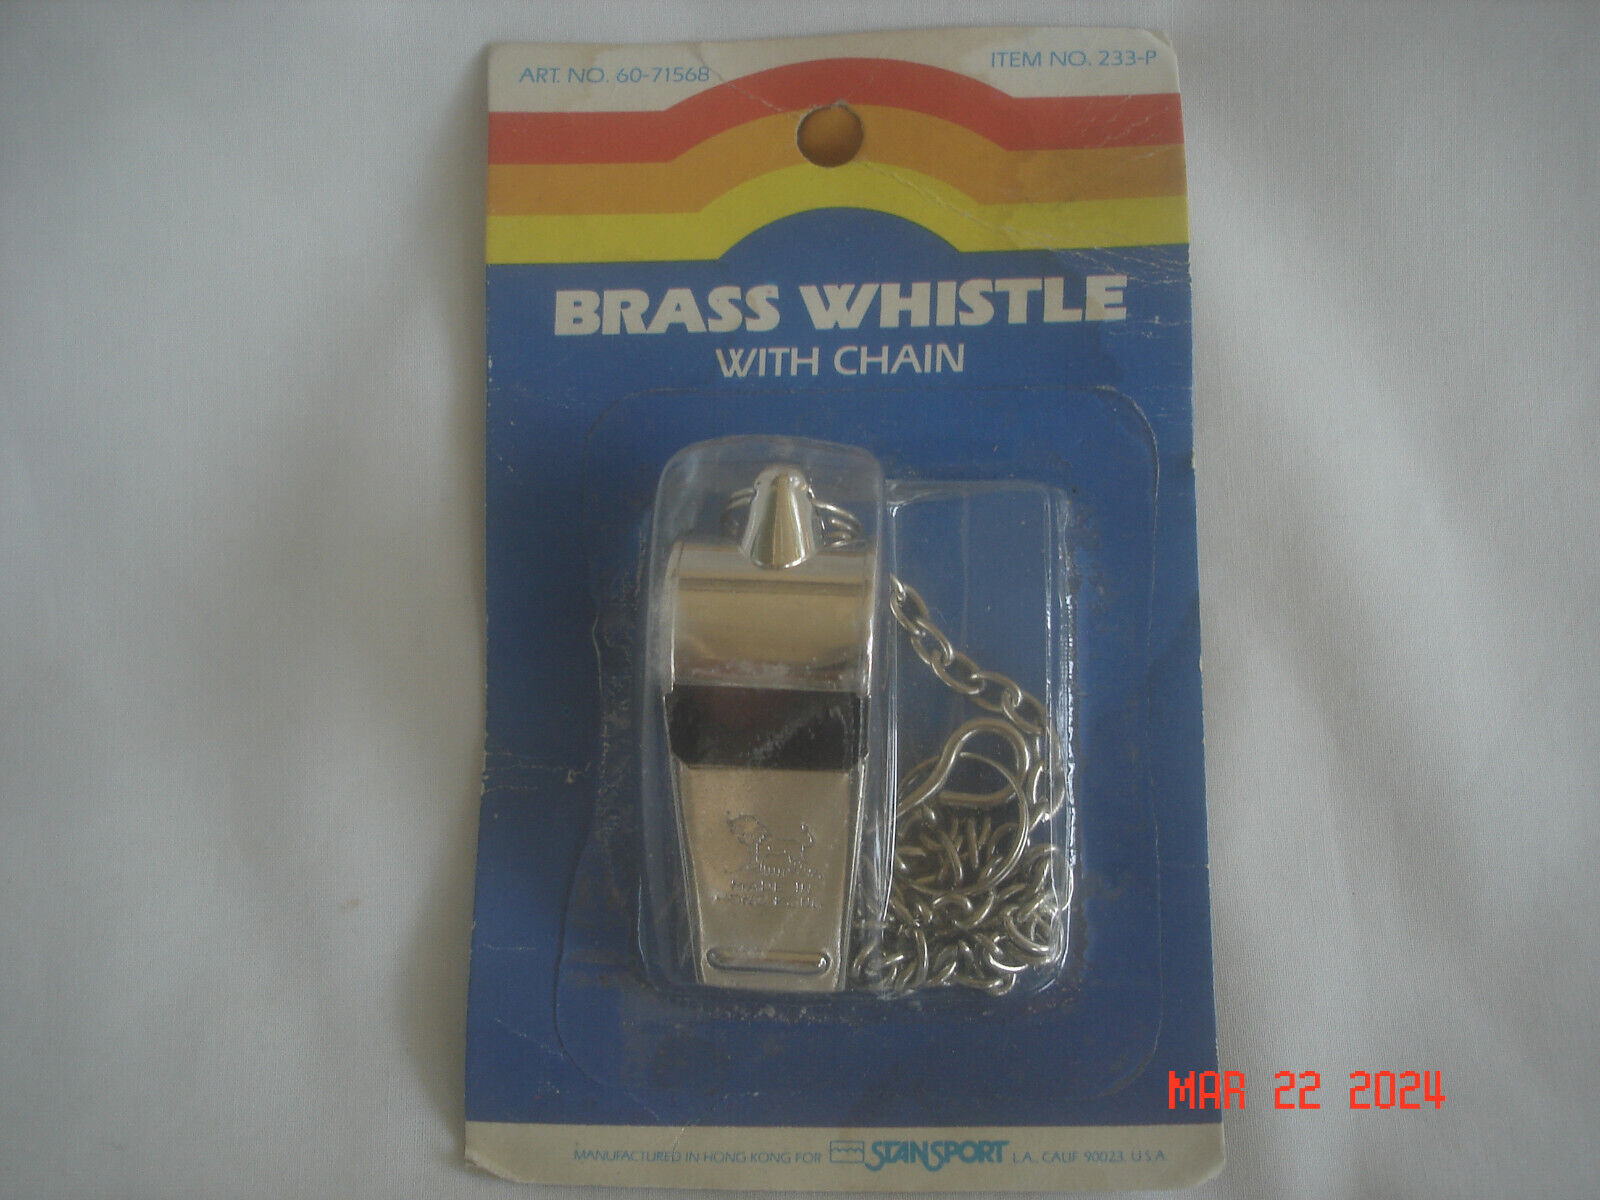 NEW in PACKAGE Vintage STANSPORT BRASS WHISTLE with CHAIN No. 233-P Hong Kong